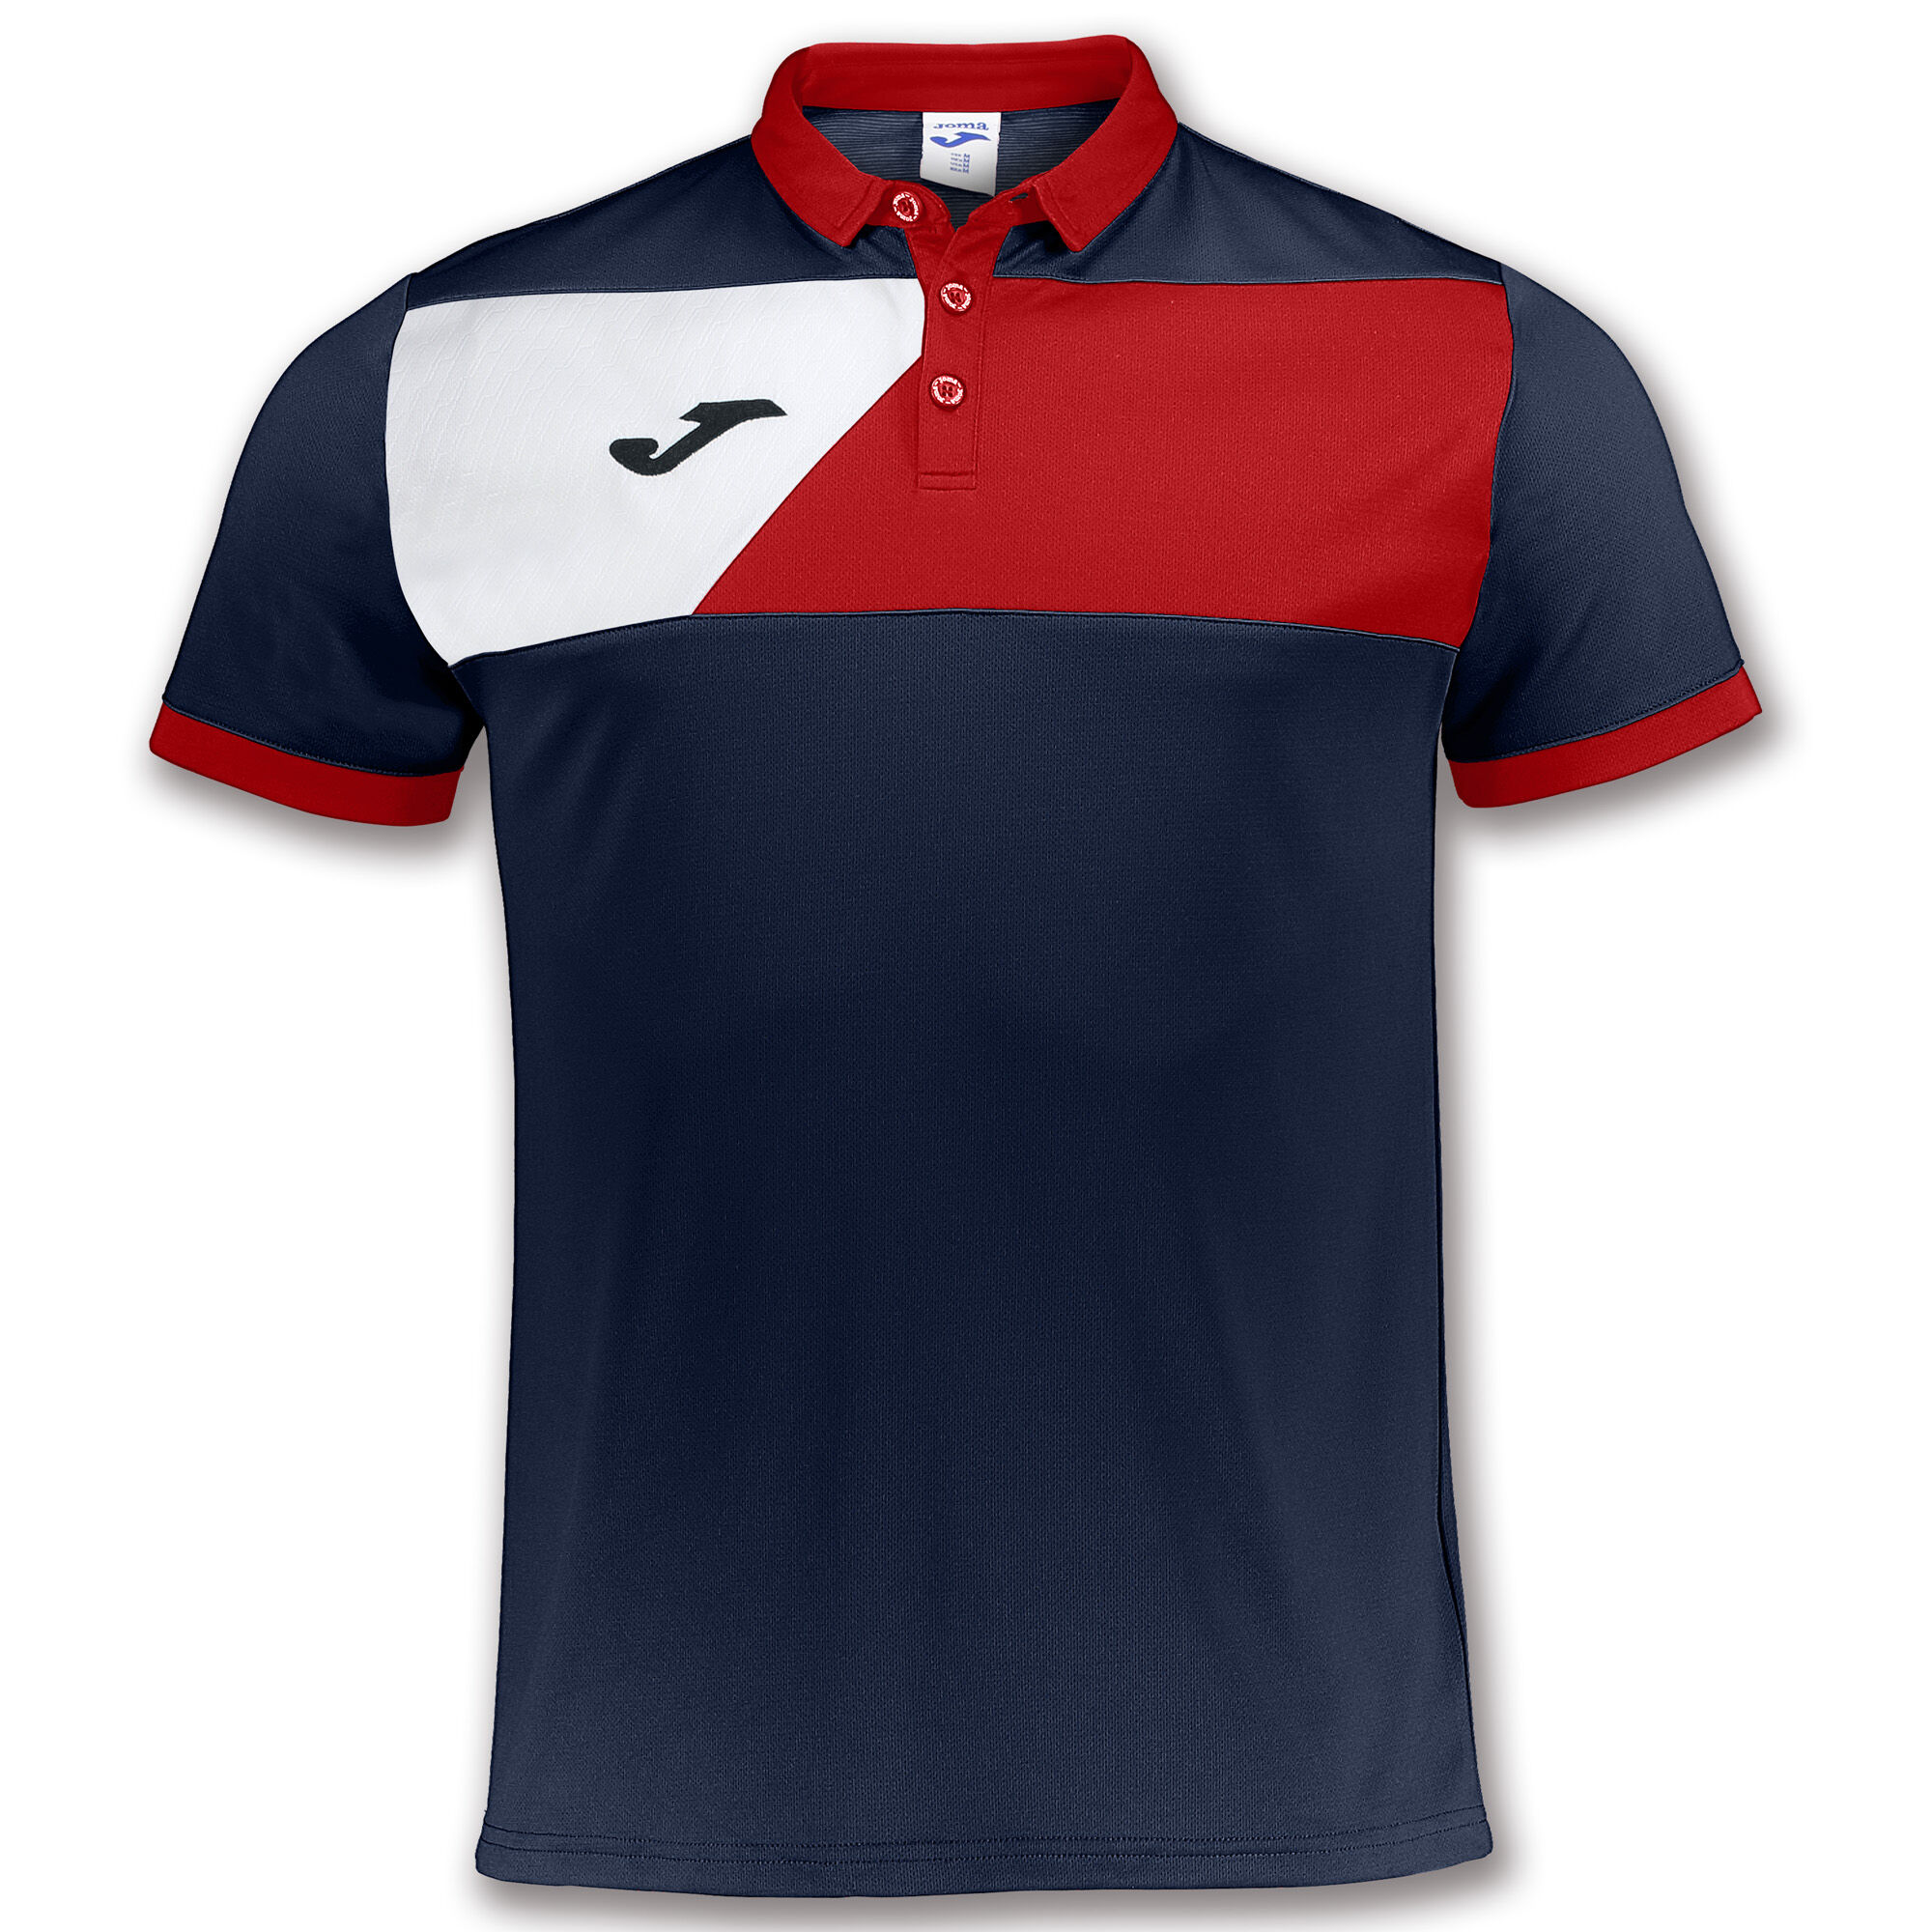 POLO MANCHES COURTES HOMME CREW II BLEU MARINE ROUGE